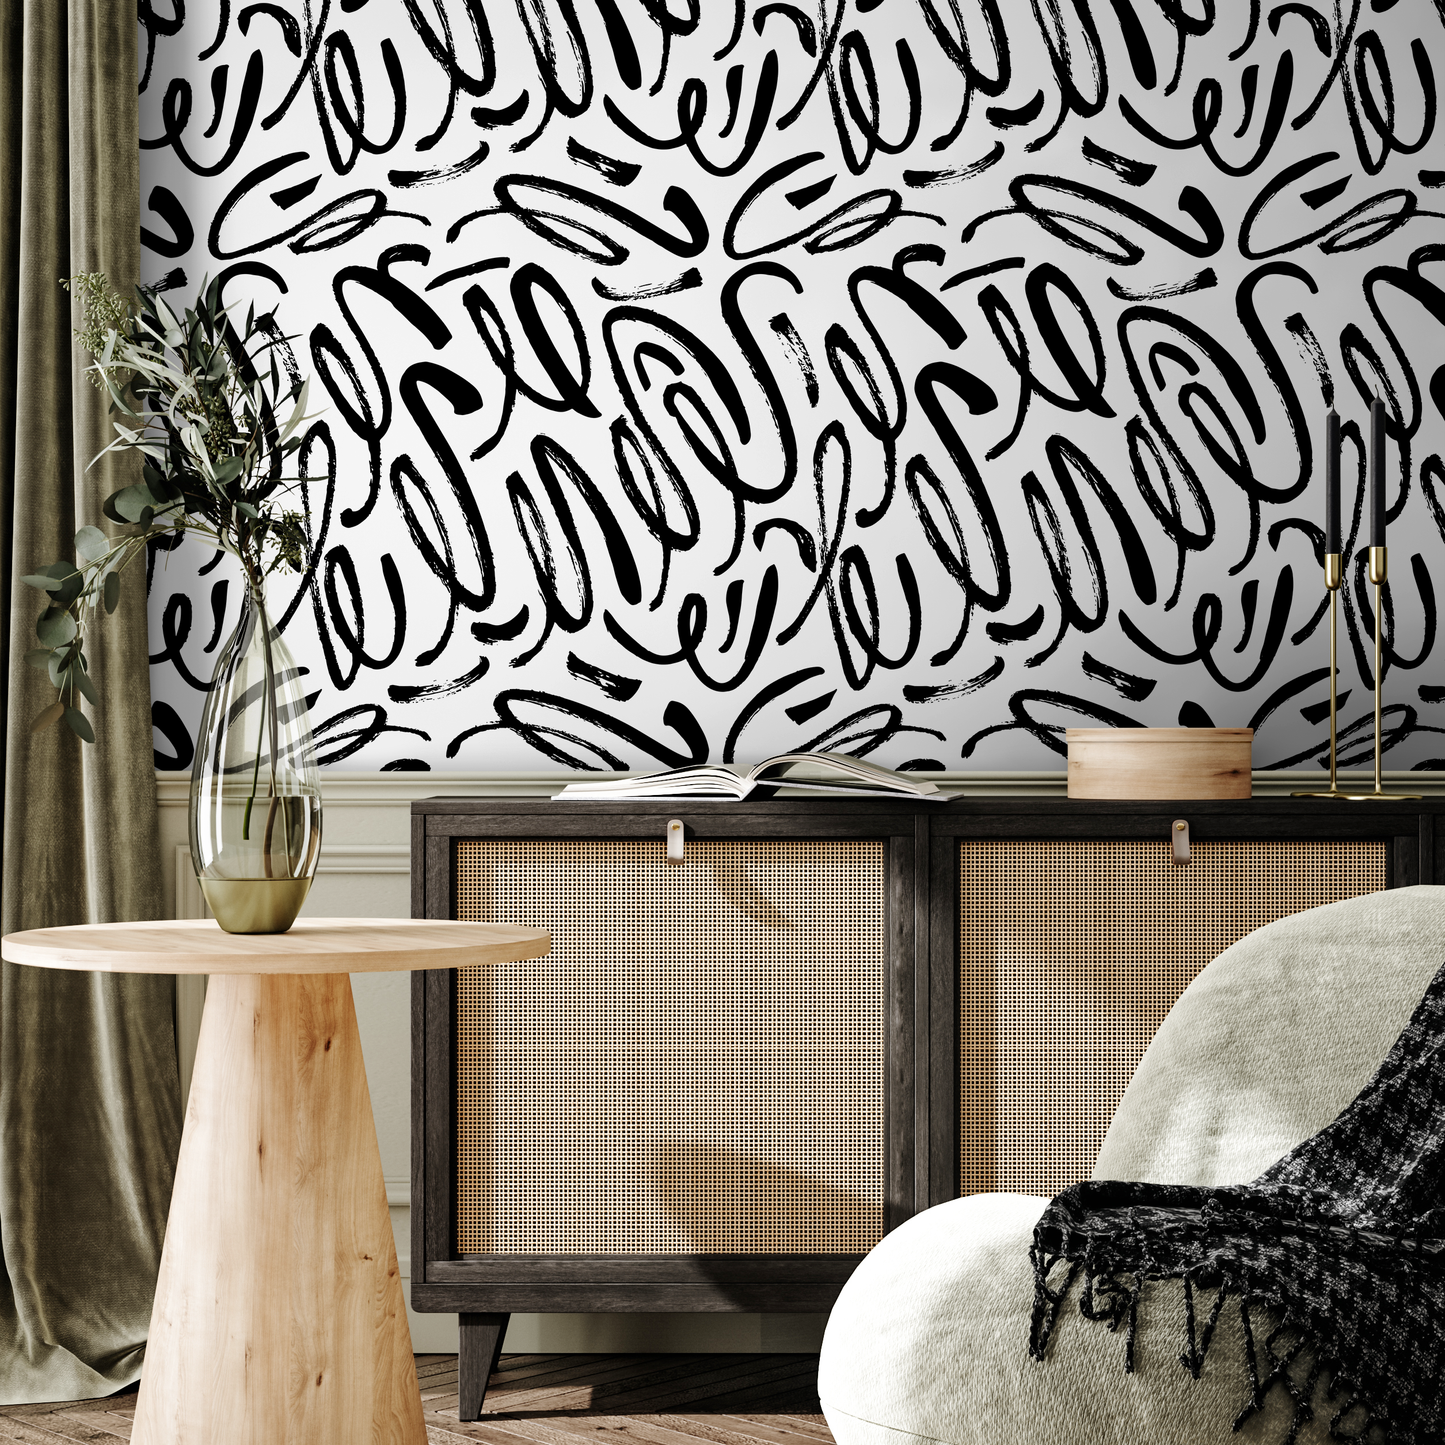 Removable Wallpaper Peel and Stick Wallpaper Wall Paper Wall Mural - Black and White Wallpaper - A589